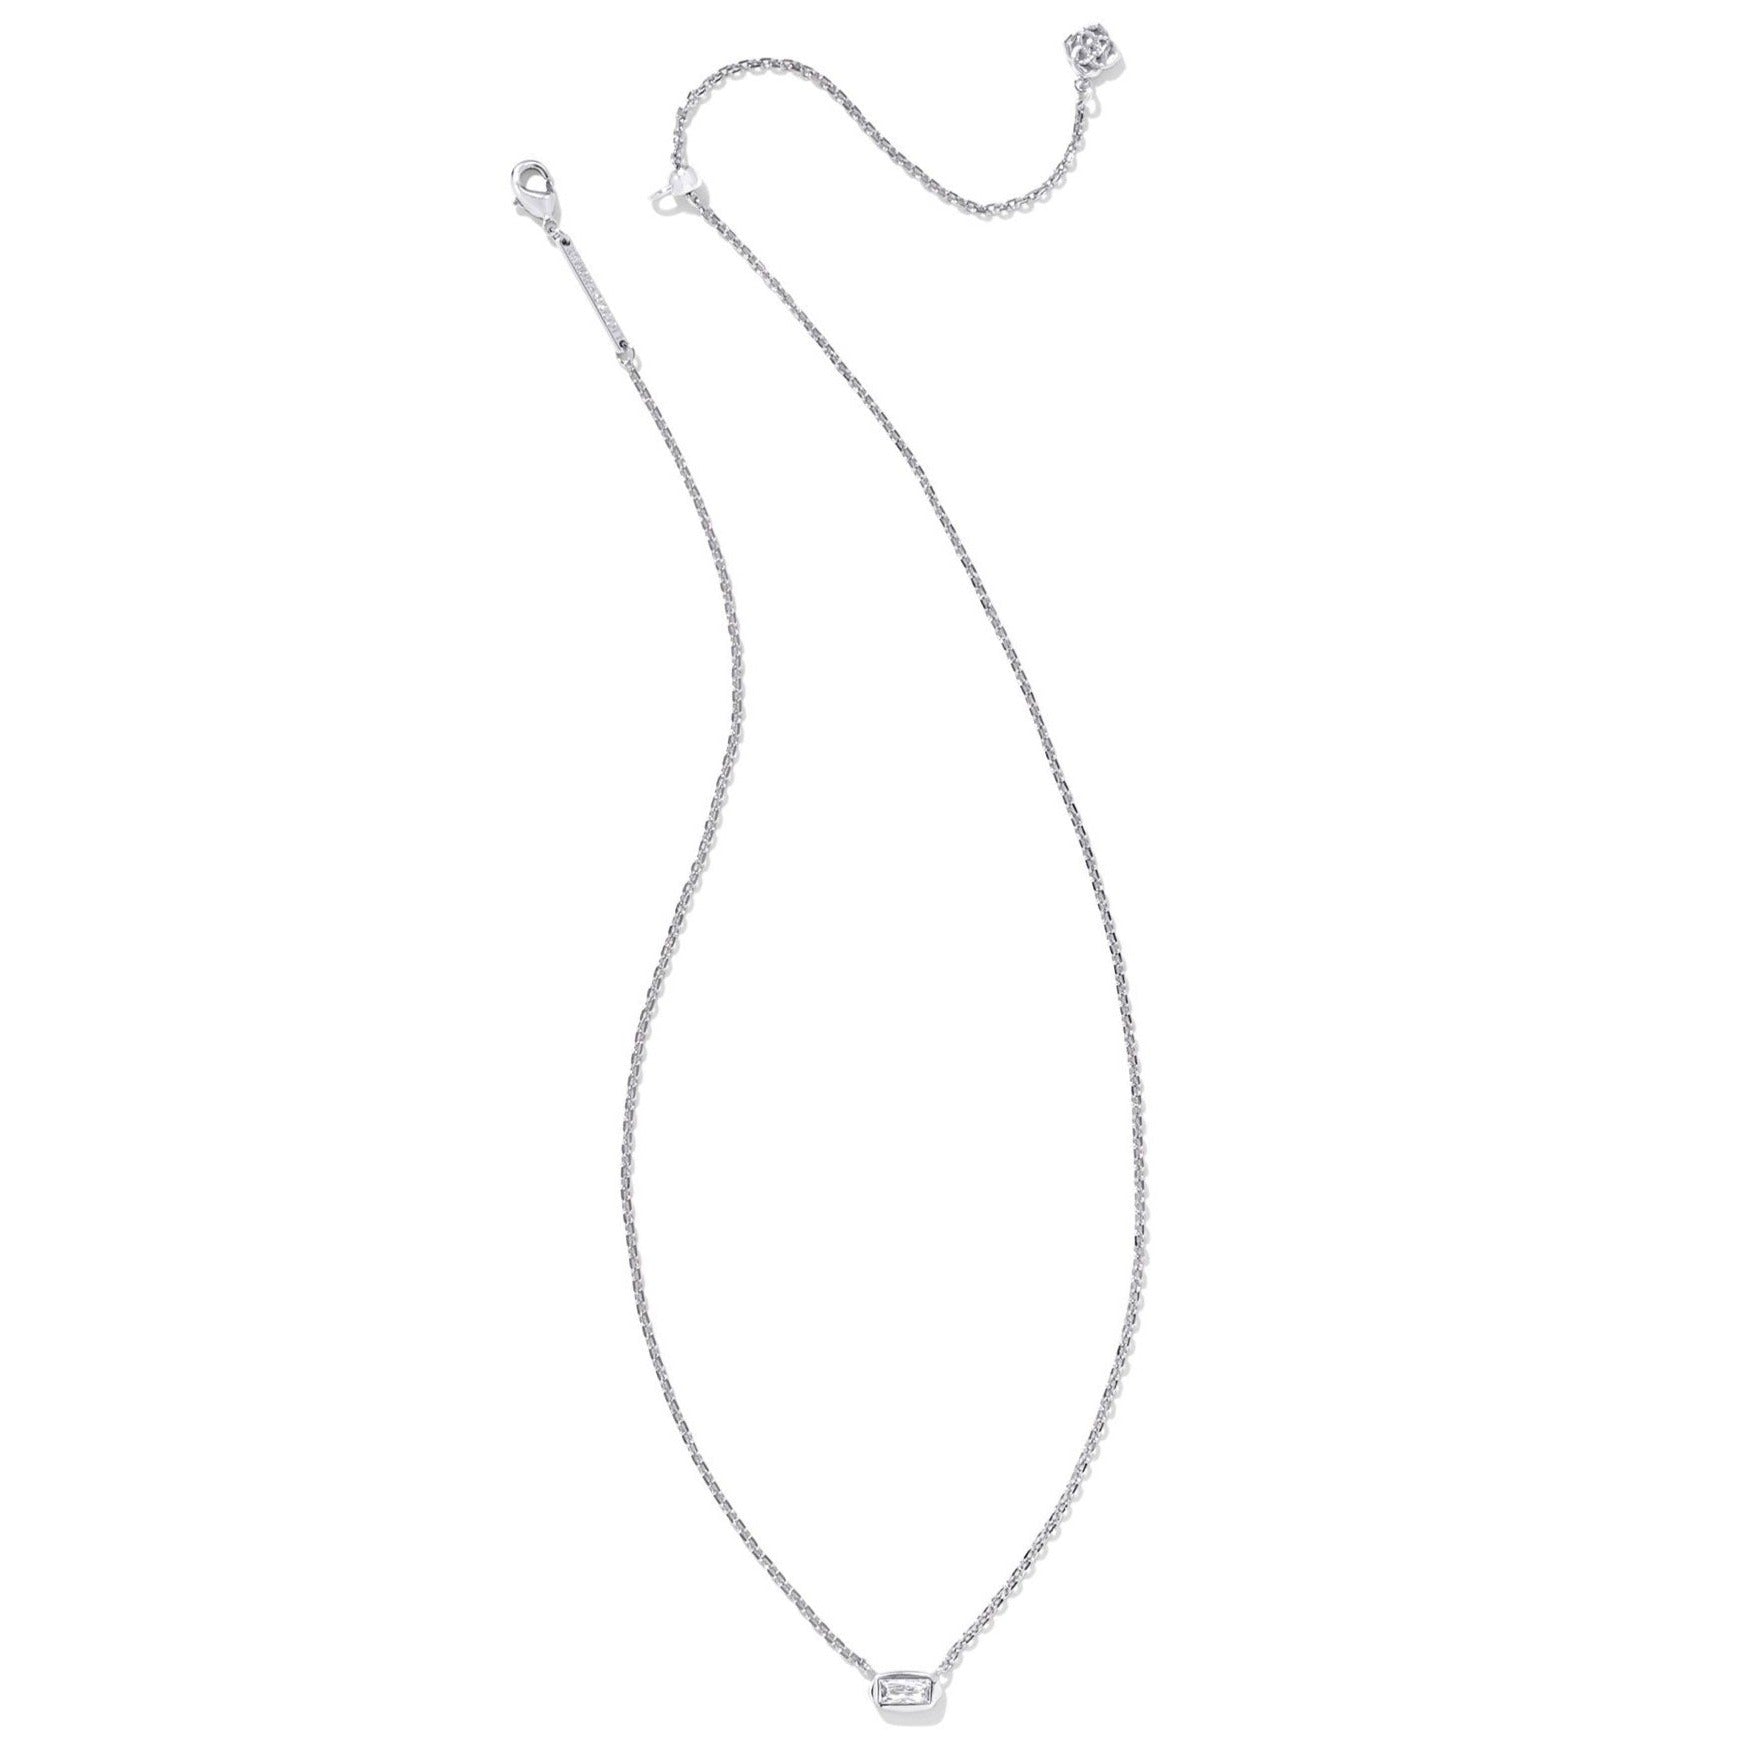 Kendra Scott | Fern Silver Crystal Short Pendant Necklace in White Crystal - Giddy Up Glamour Boutique